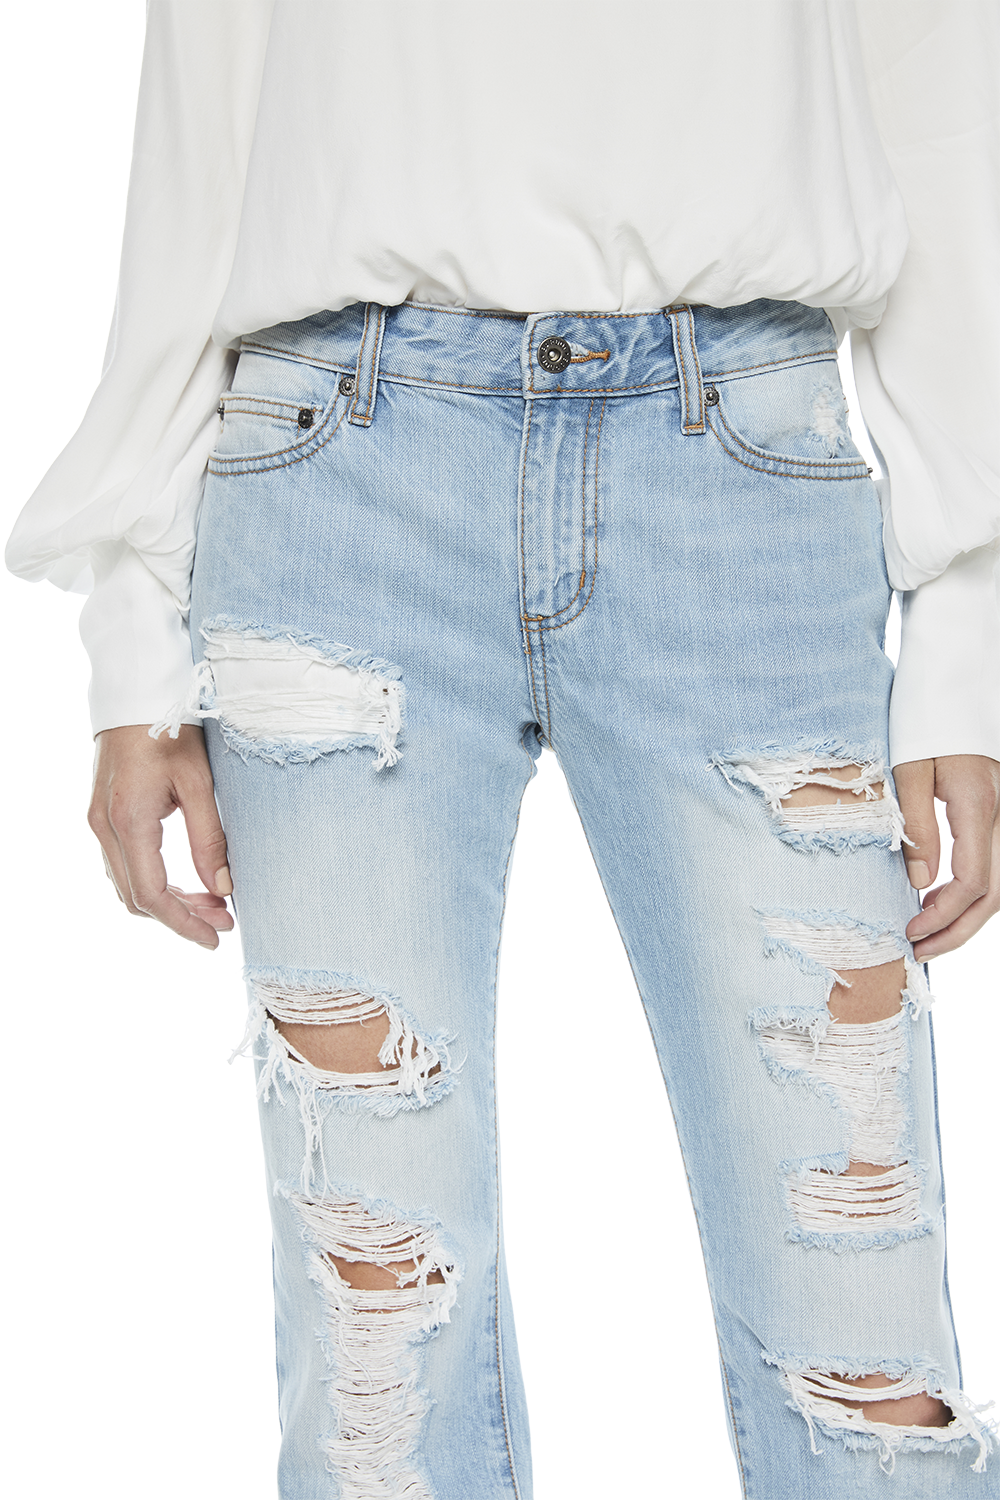 petite lift and shape jeans